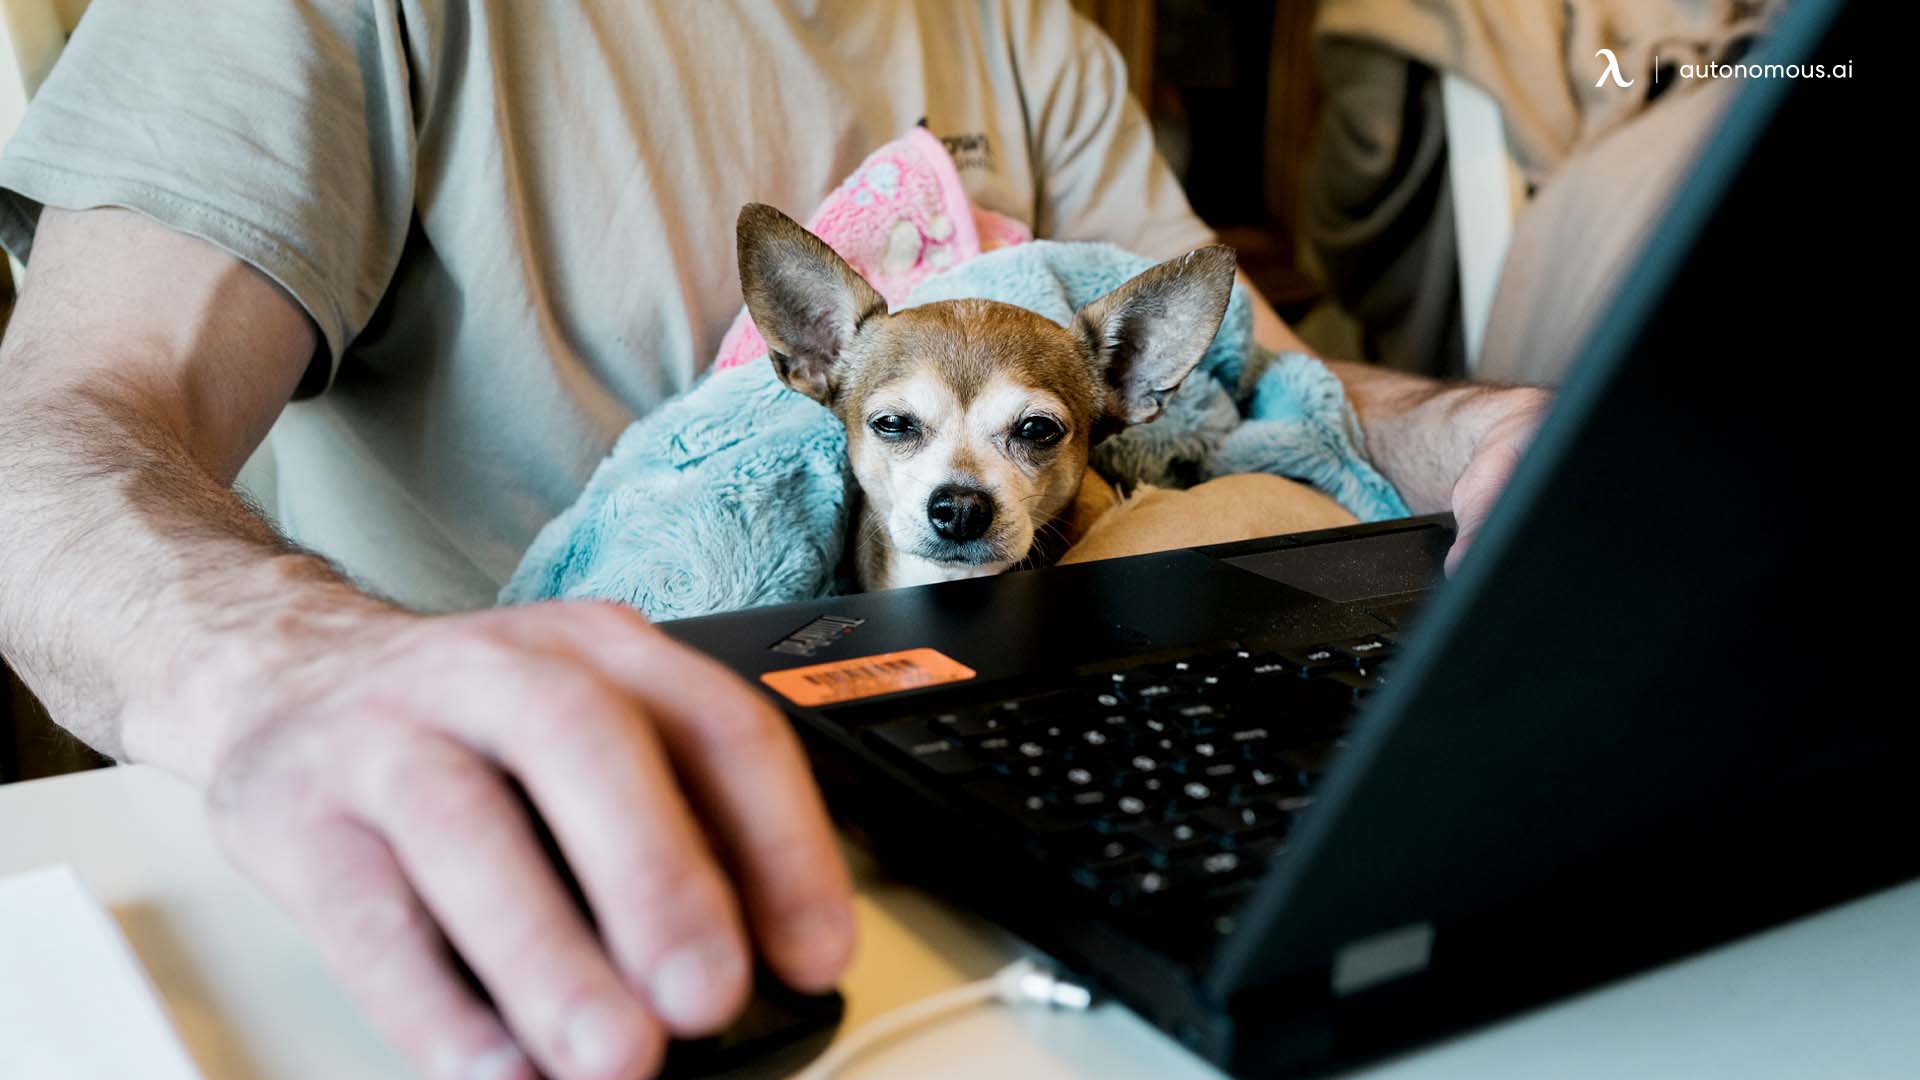 Why you should work at home